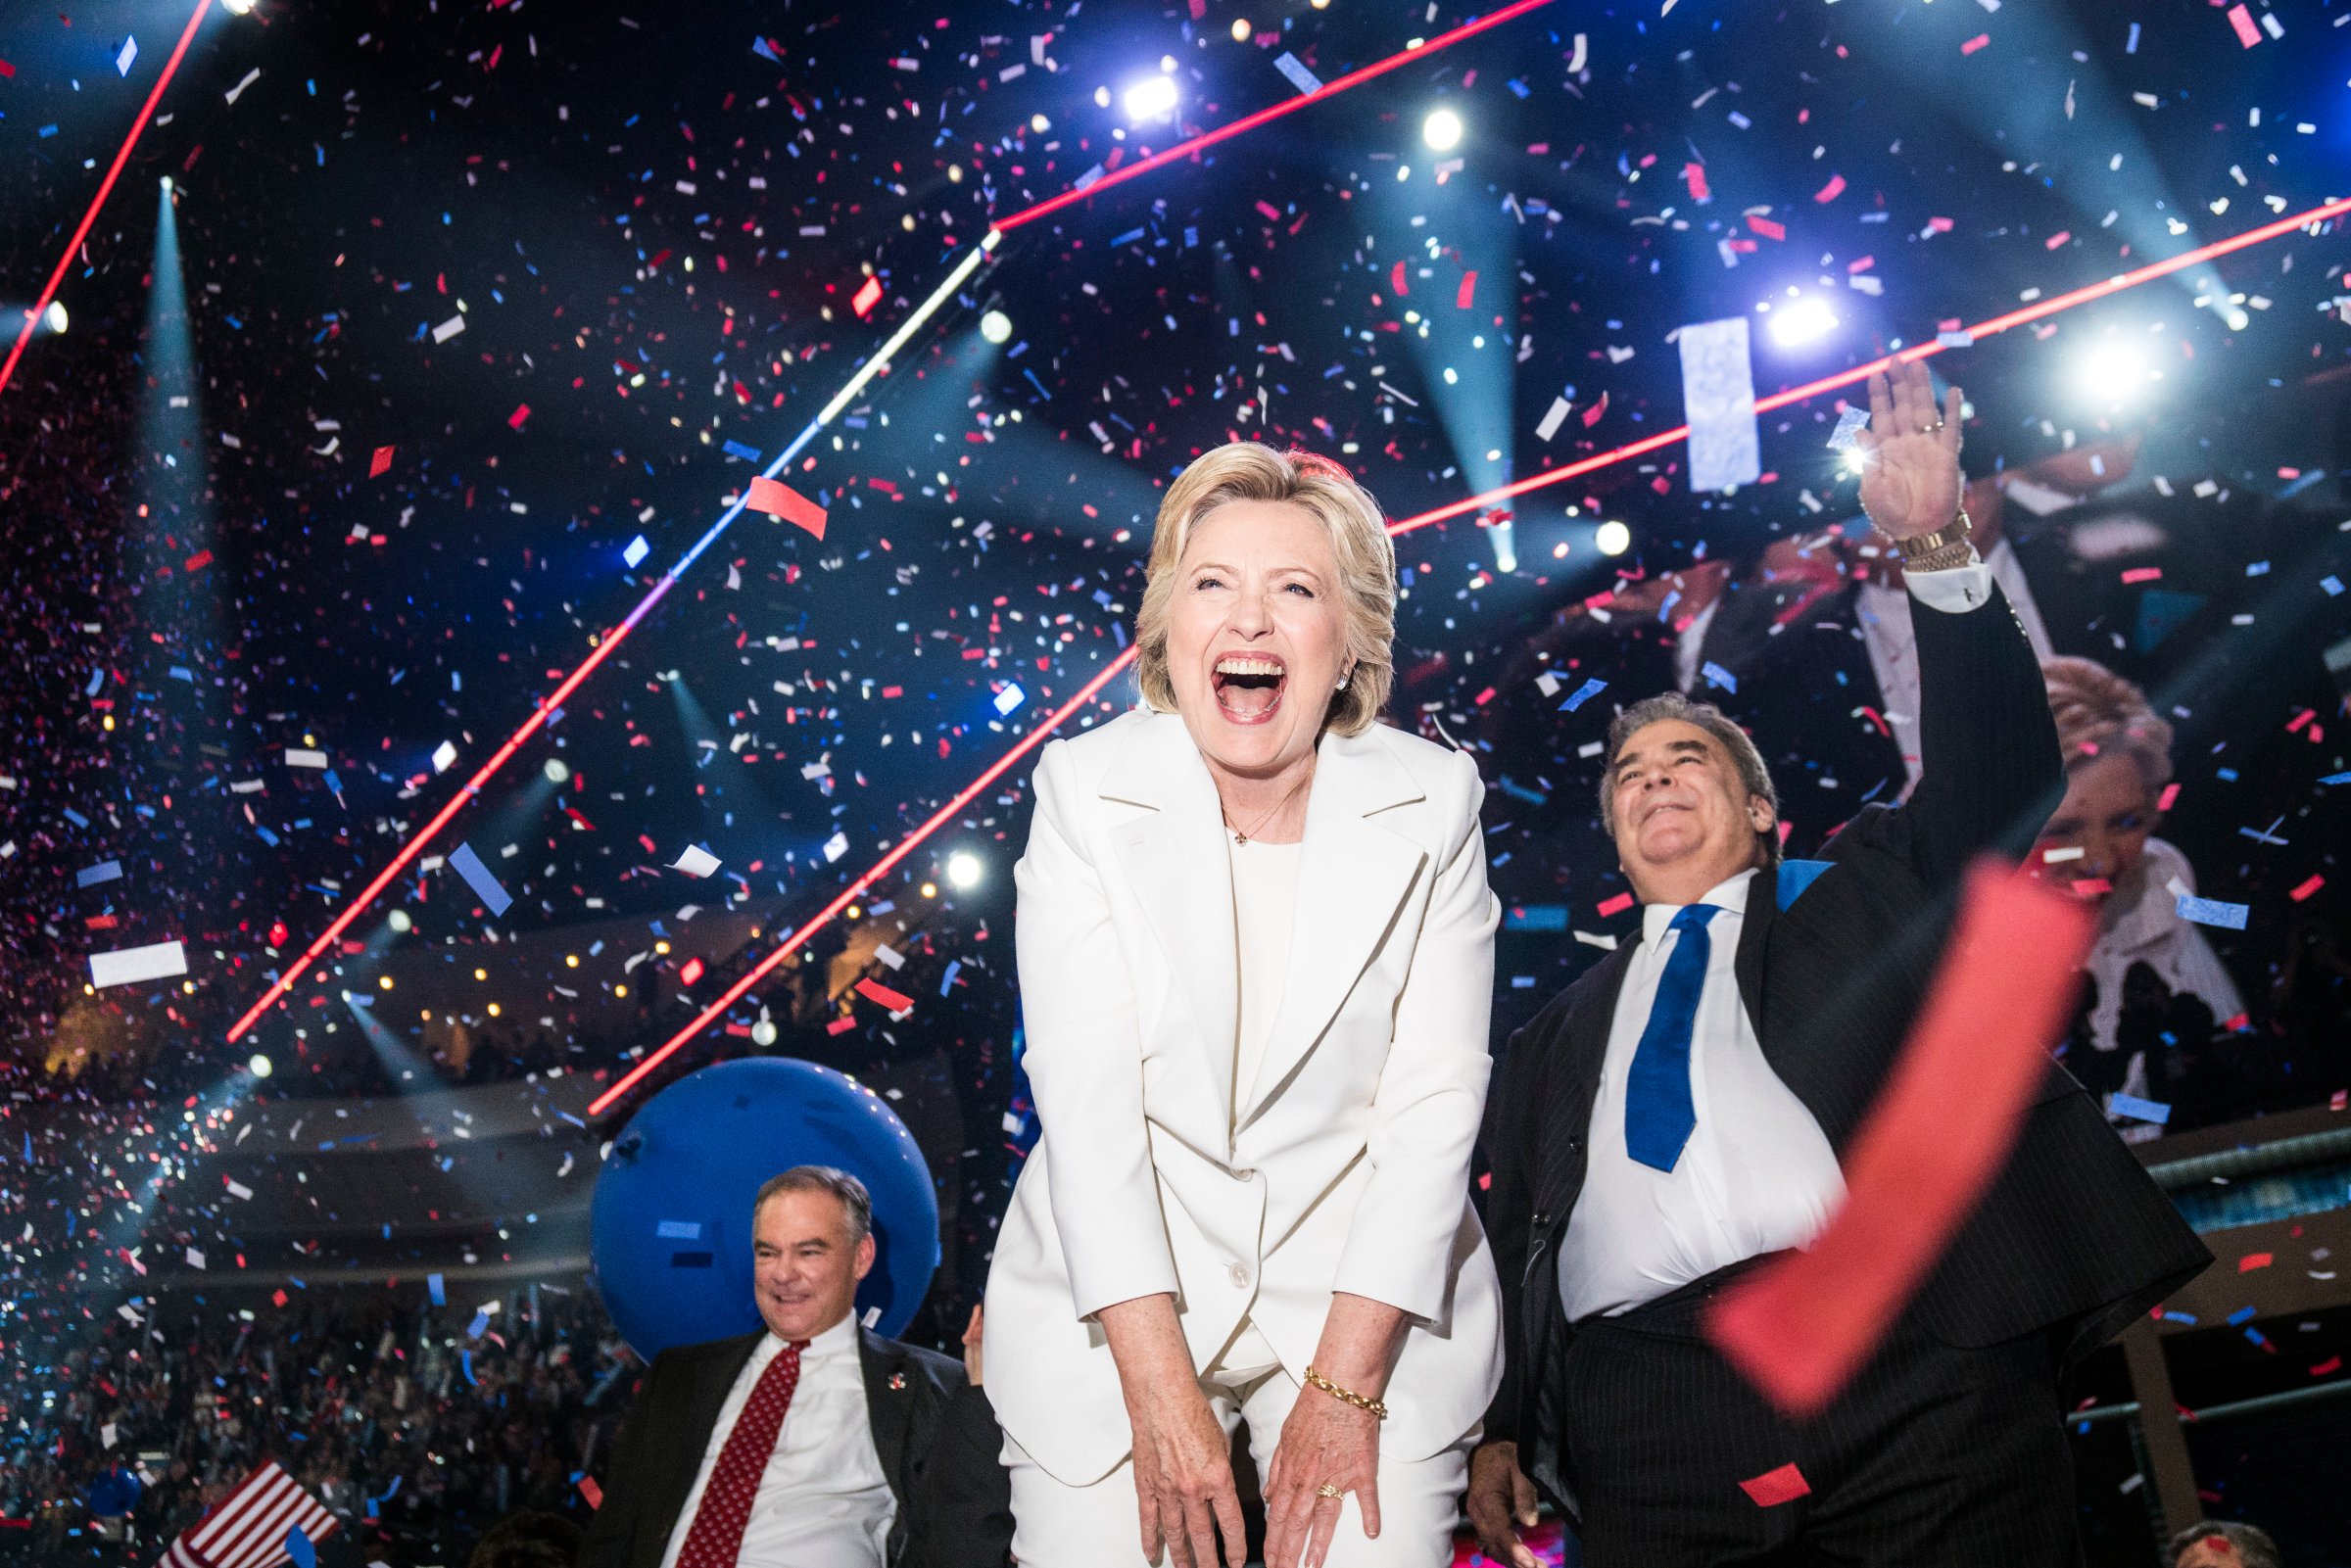 An ecstatic Hillary Clinton celebrates at the conclusion of the Democratic National Convention where she accepted the nomination on Thursday, July 28, 2016 in Philadelphia.